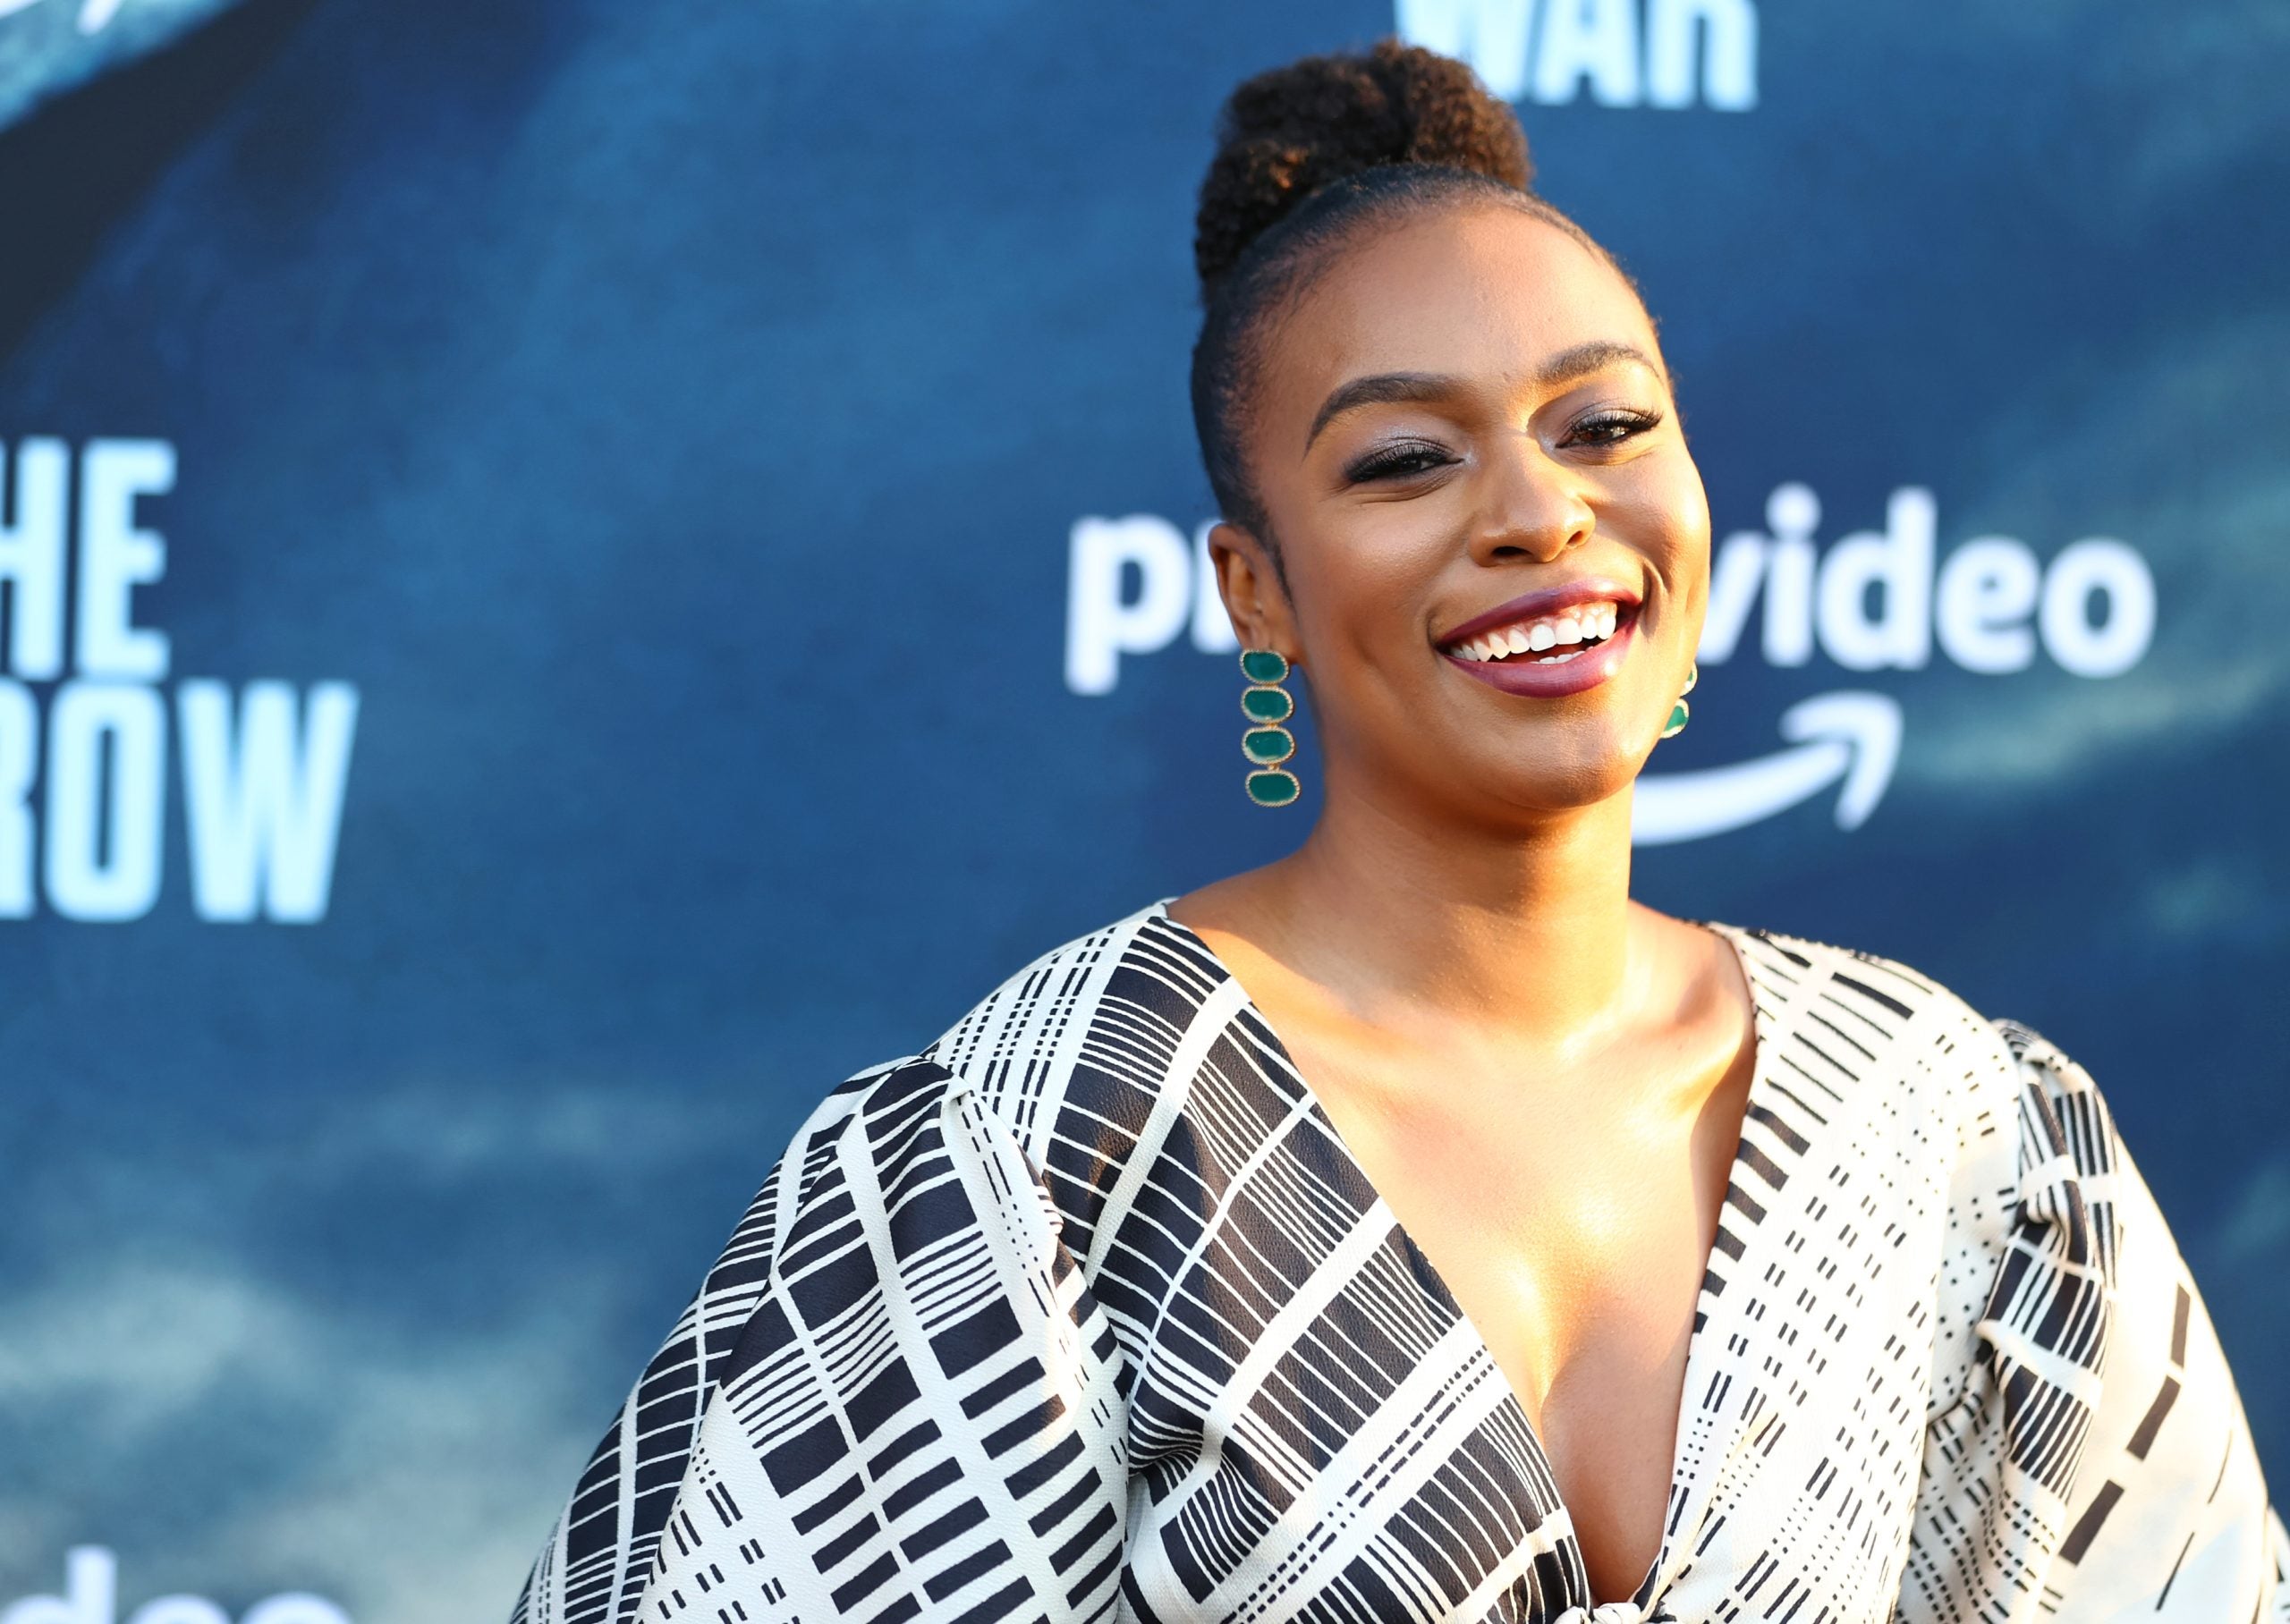 Nomzamo Mbatha On Acting, Her New Film ‘Assassin,’ And The Importance Of One’s Life Purpose